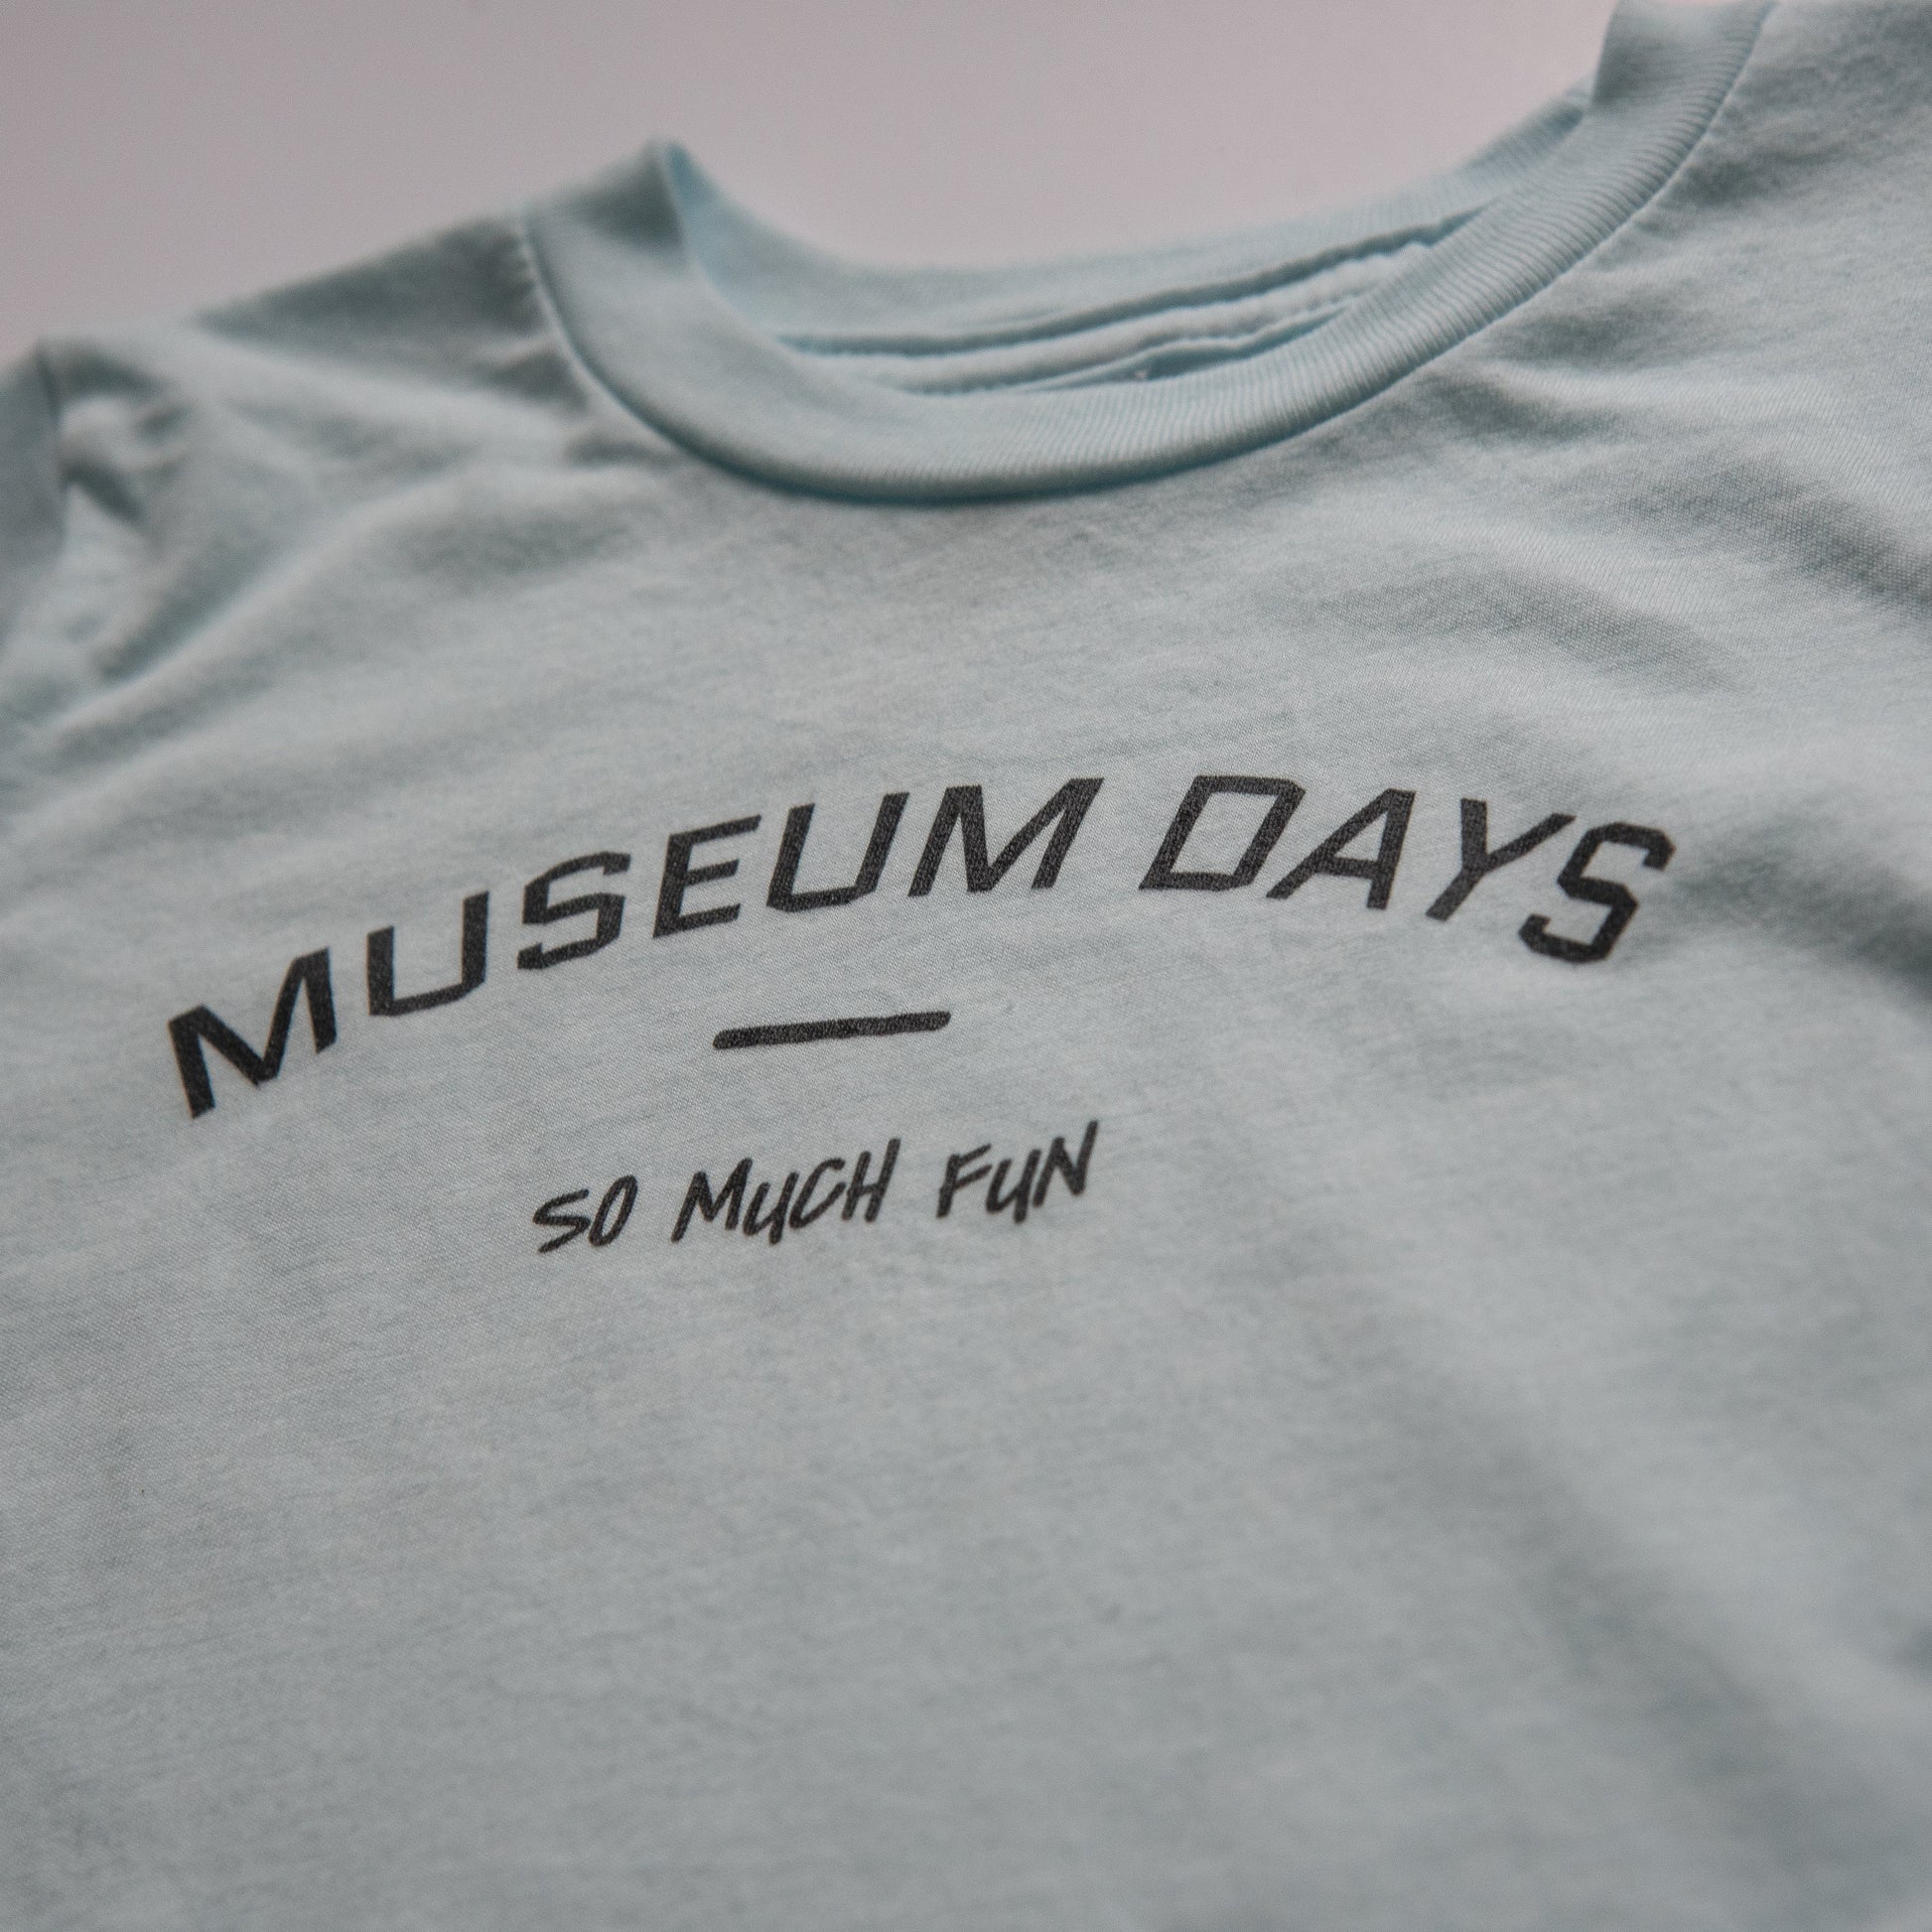 MUSEUM DAYS SO MUCH FUN - Short Sleeve Toddler Tee - 2 COLORS! - Little Mate Adventures 